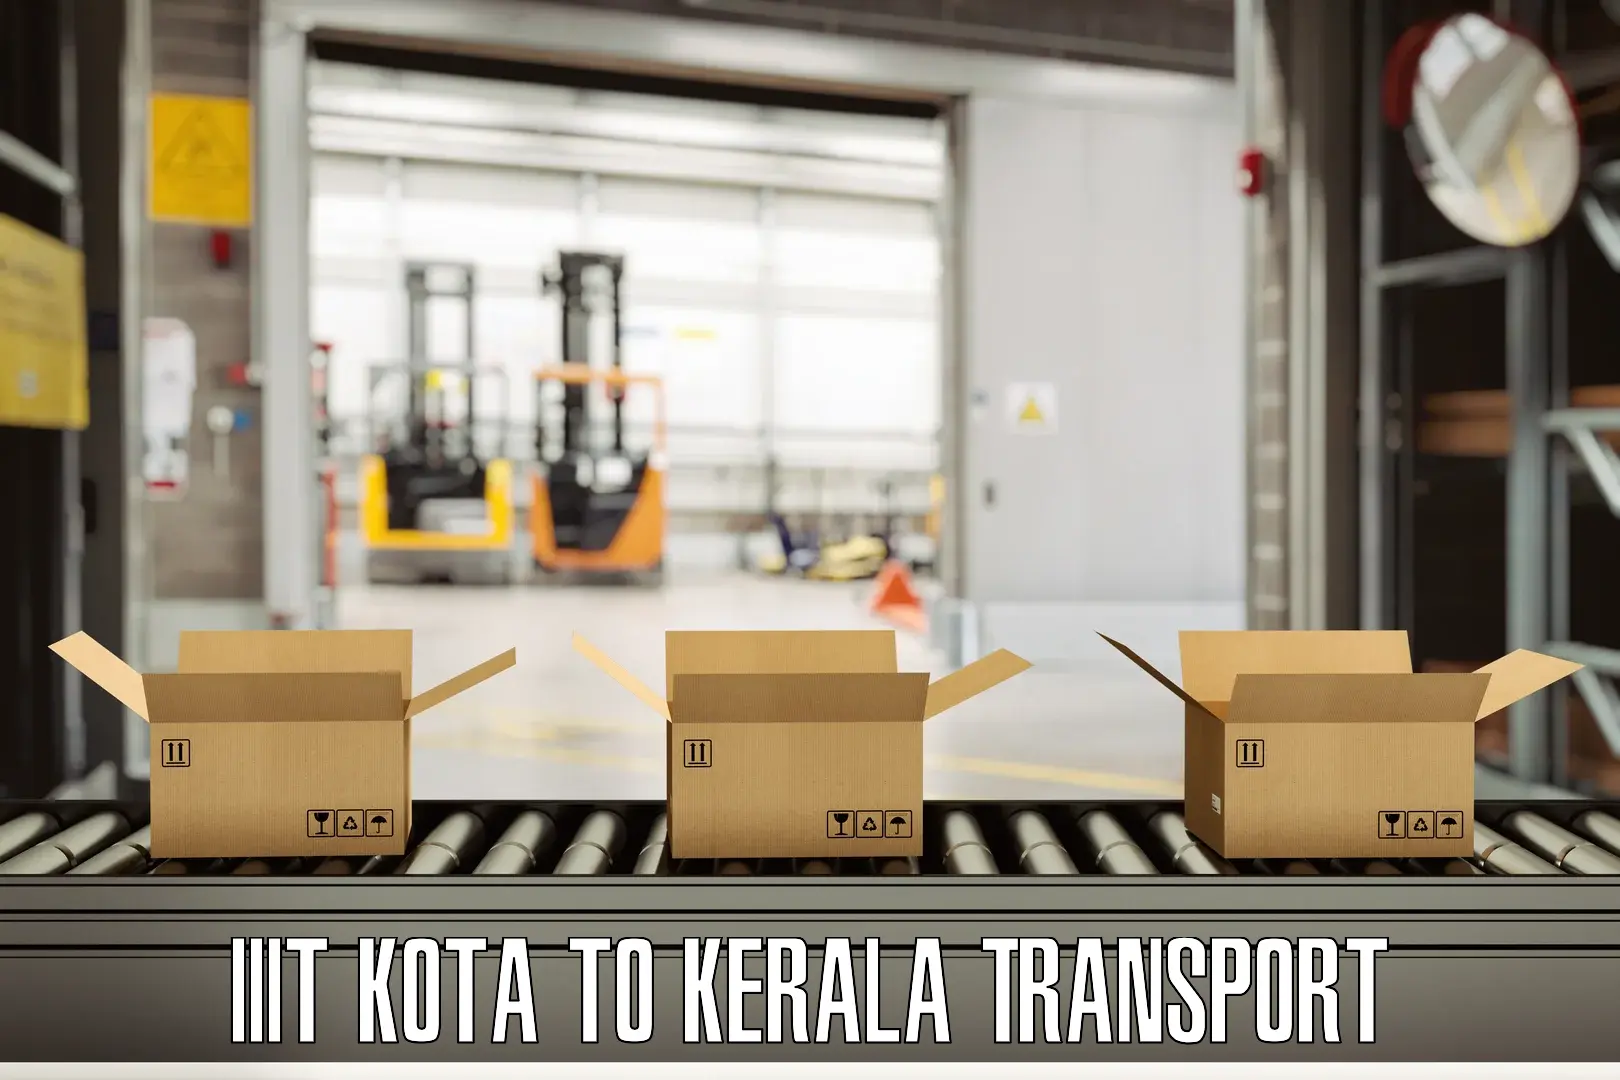 Express transport services in IIIT Kota to Rajamudy